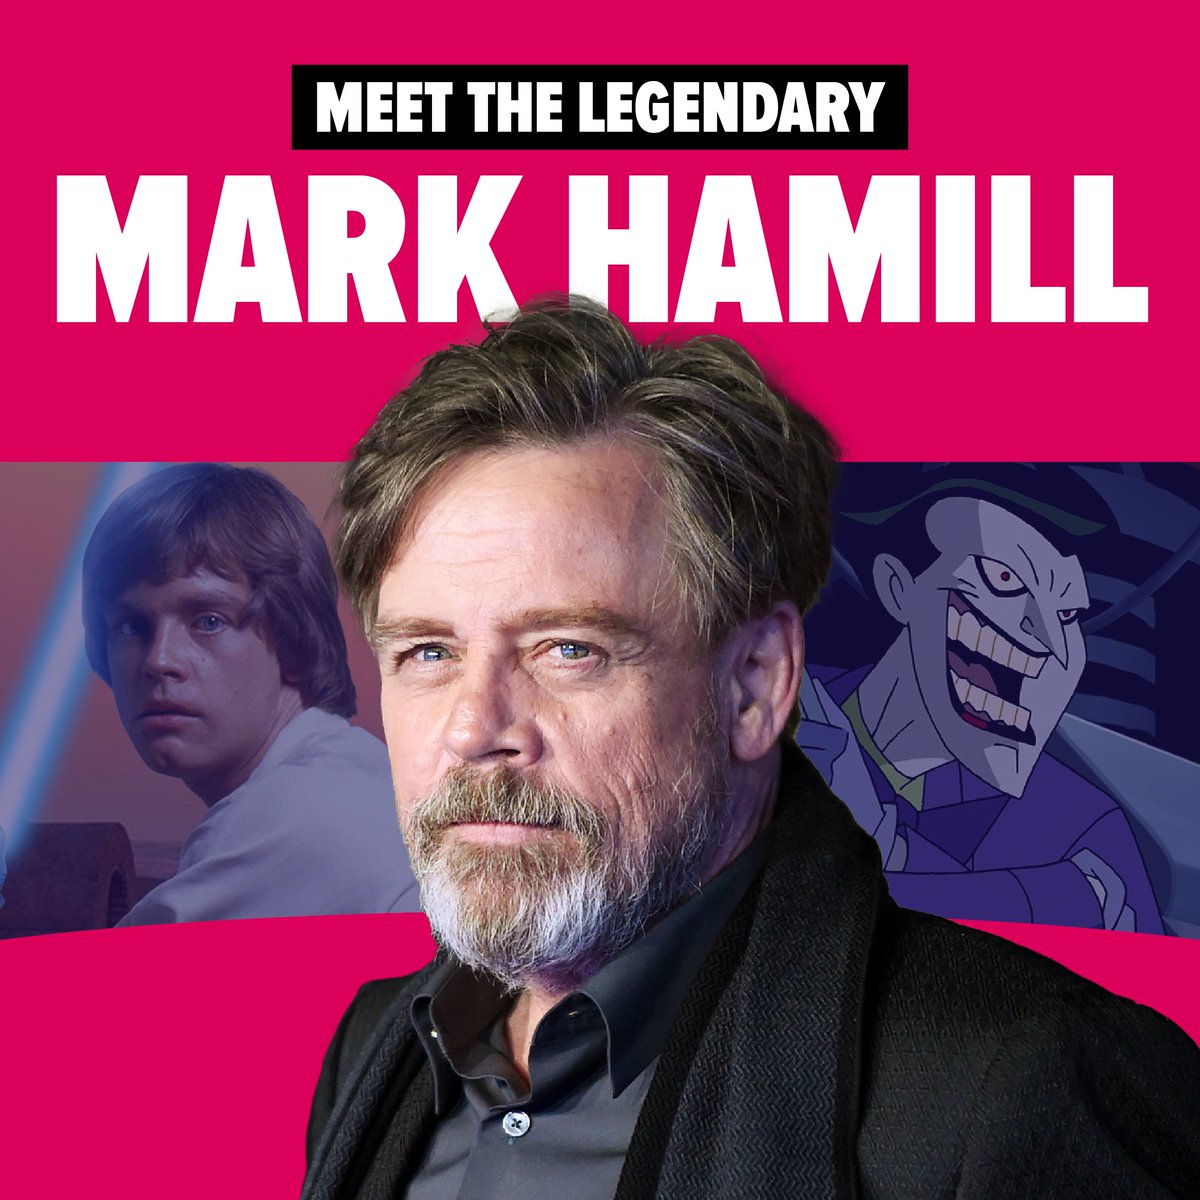 The legend himself, Mark Hamill (Star Wars, Batman), is coming to FAN EXPO Chicago for a super rare appearance. Photo ops, autographs, and special experience tickets go on sale Tuesday, May 7th at 10 AM CT. Mark your calendars & get your show tickets now: spr.ly/6010jnpsa